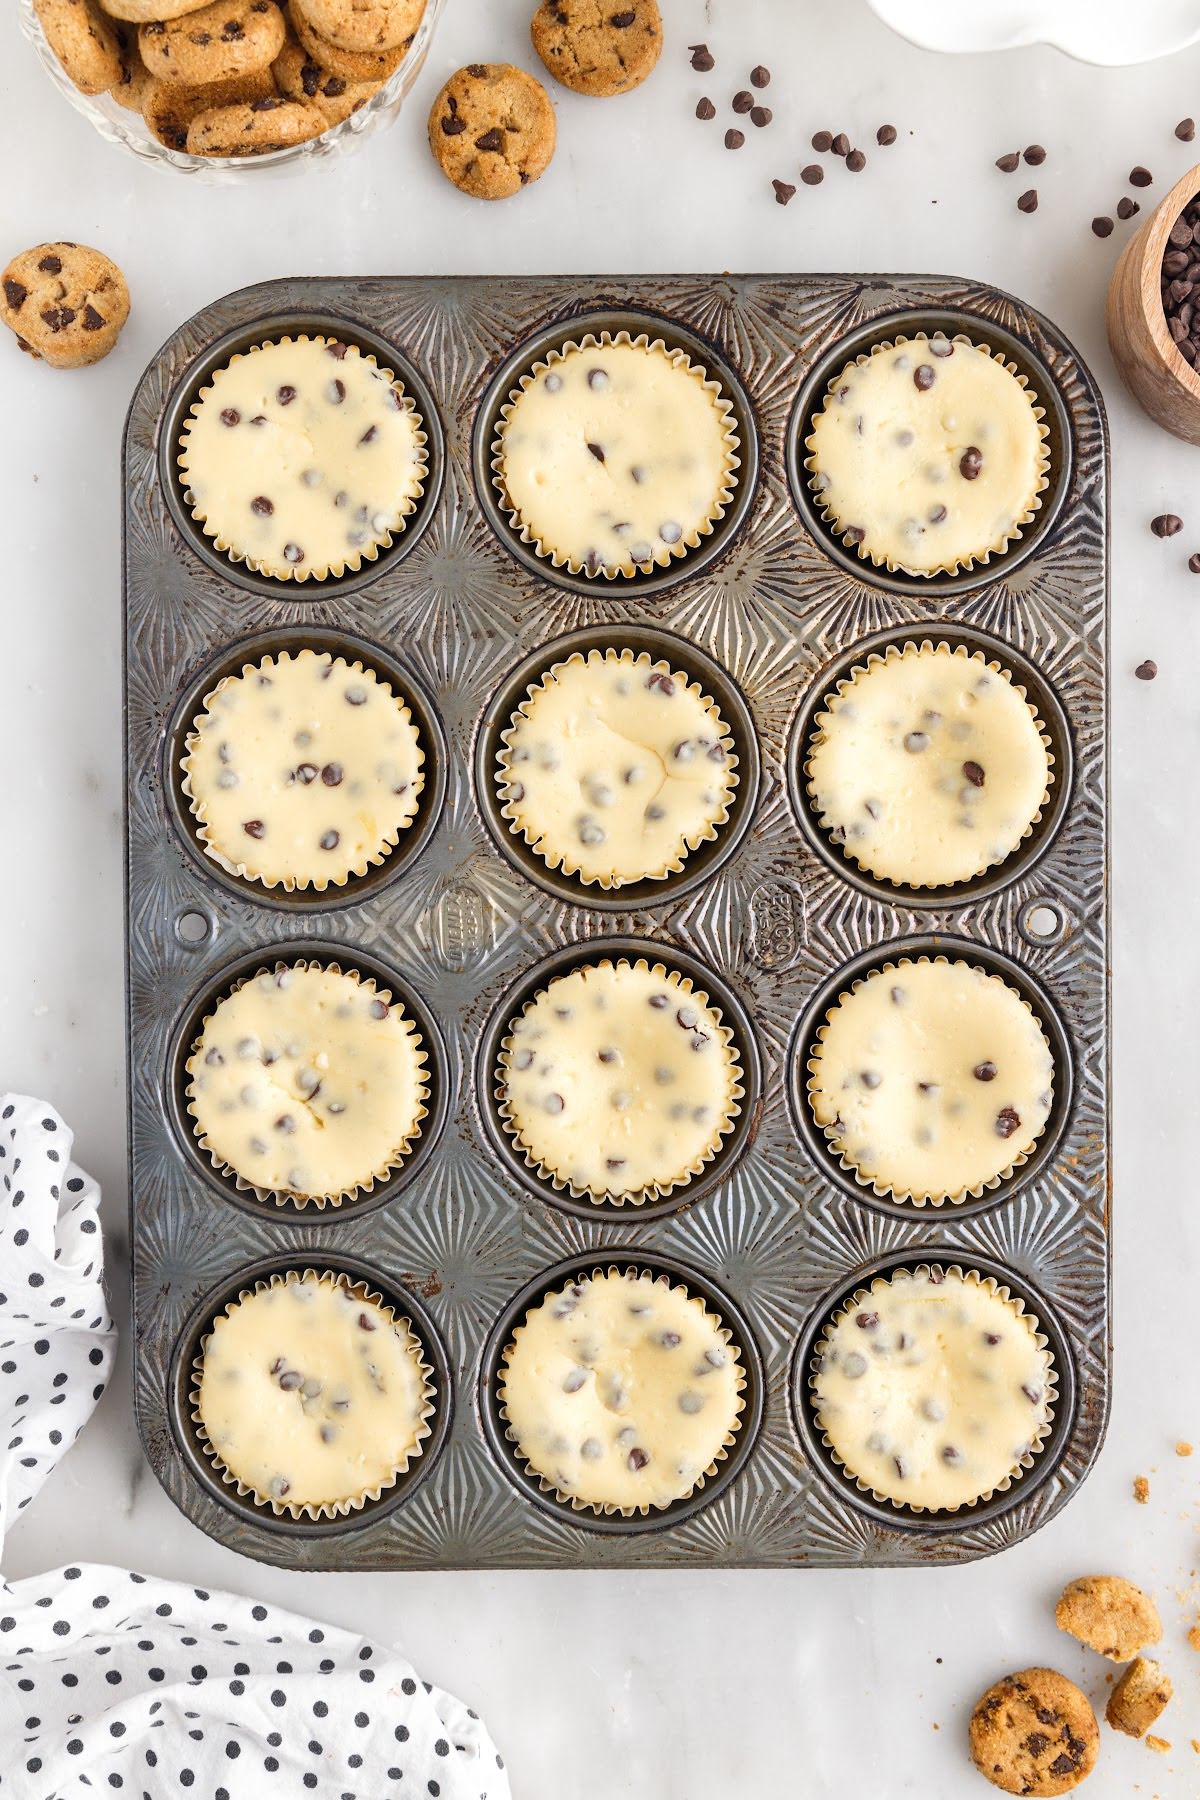 Fully baked cheesecake batter in muffin tins.